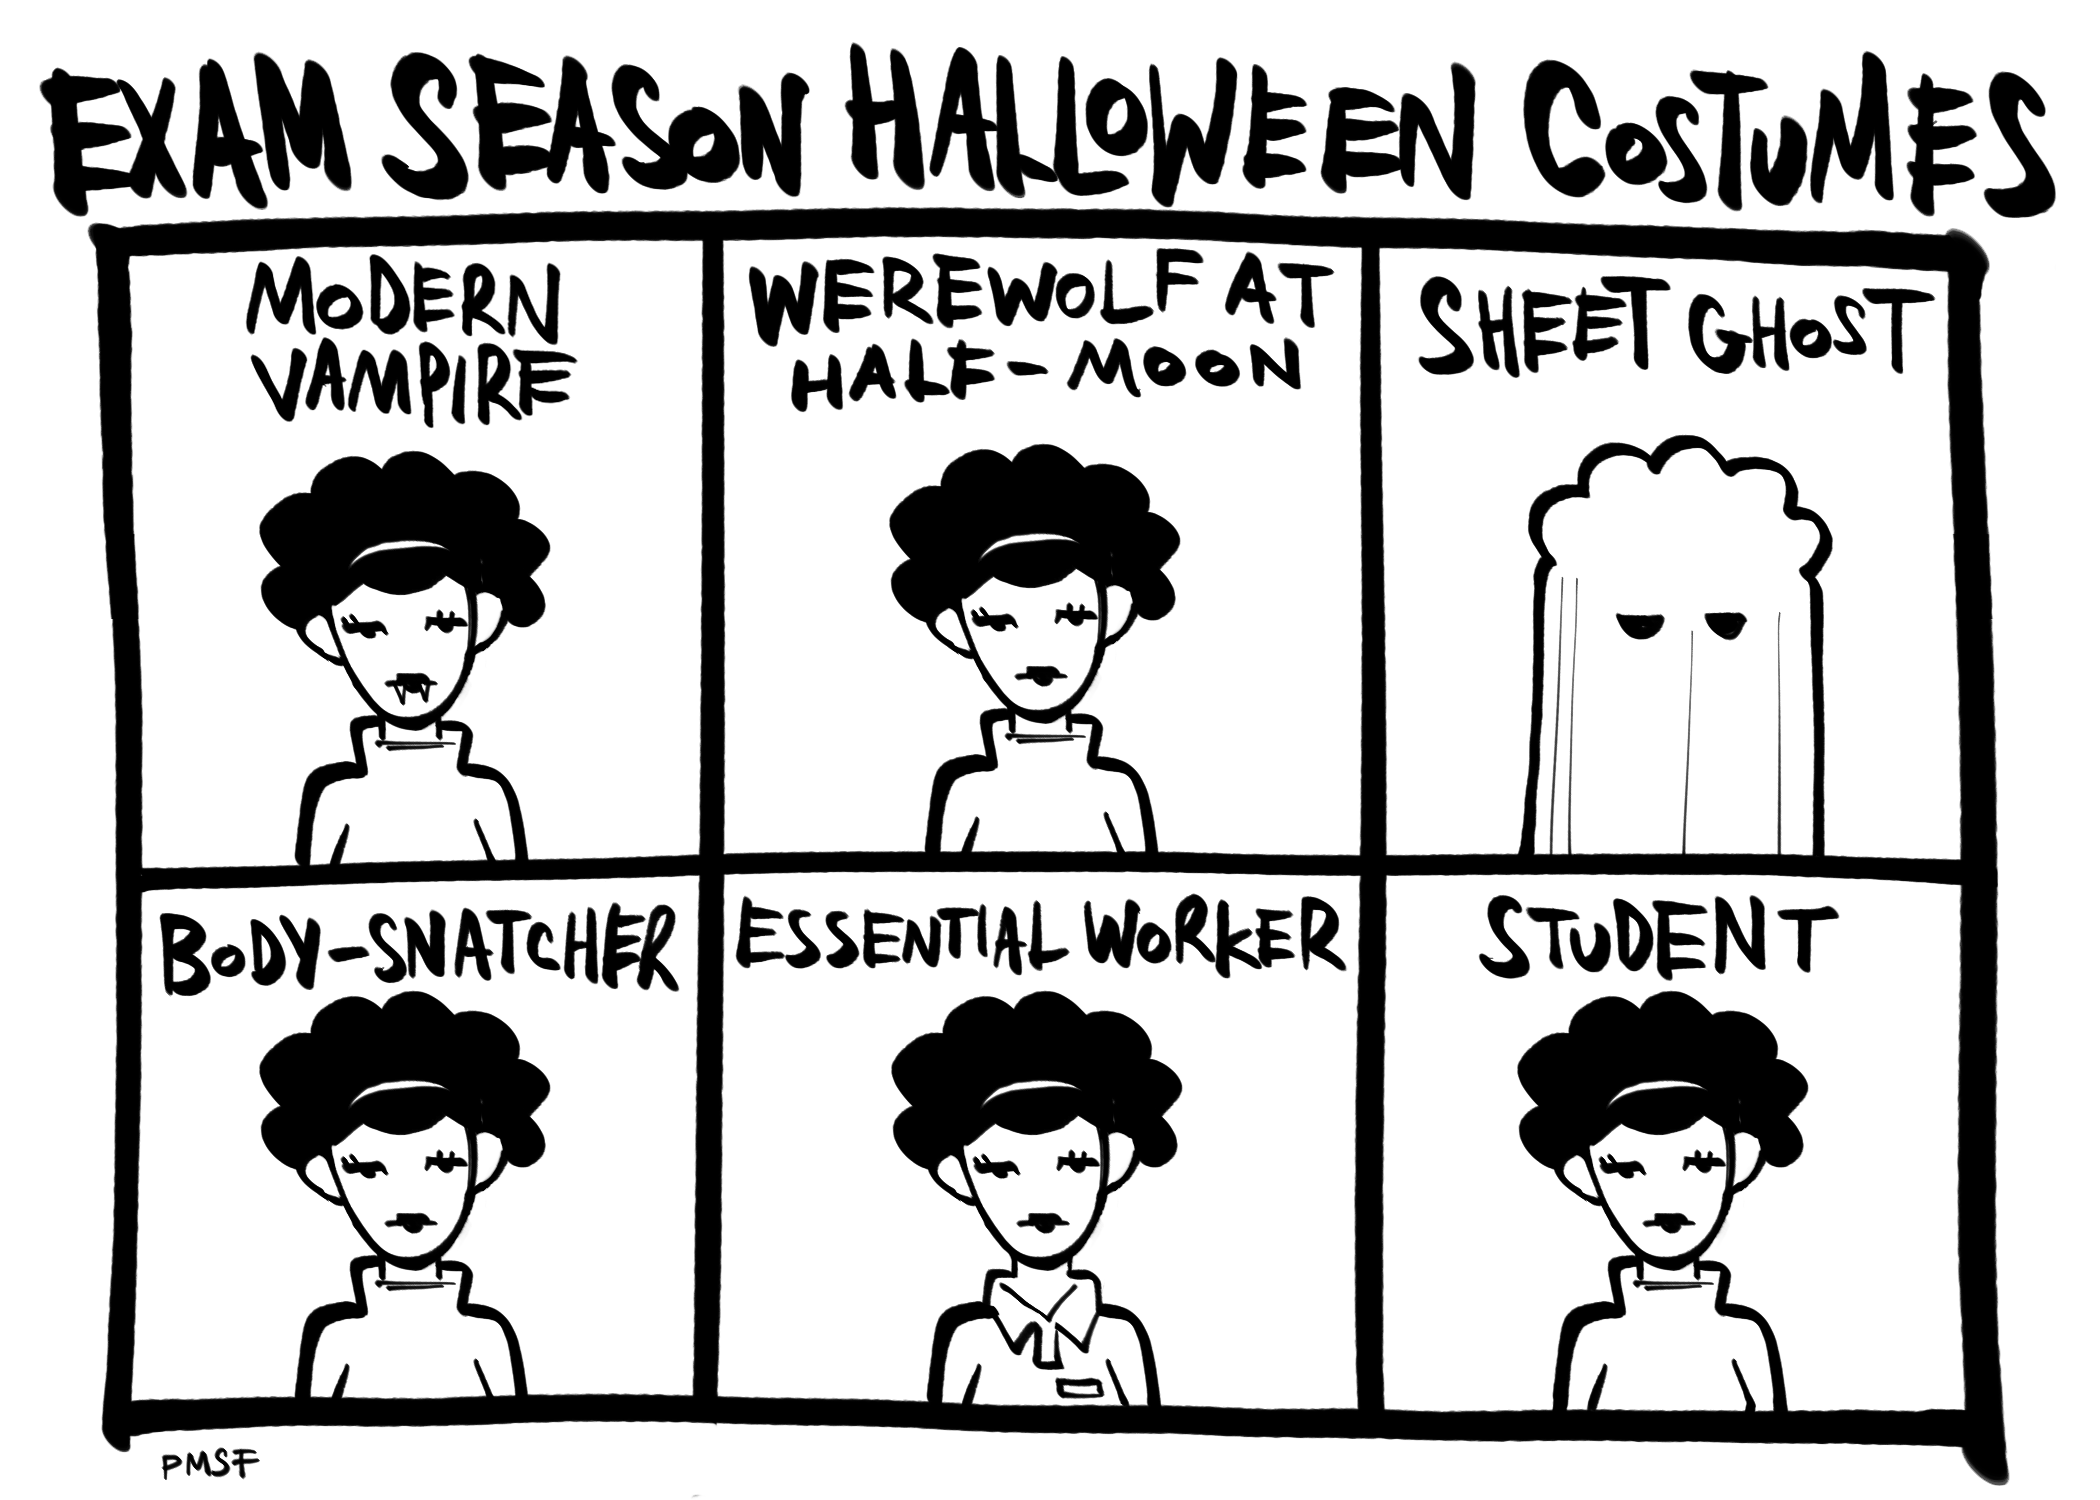 Halloween costume cartoon illustration by Parris Mook-Sang-Forbes.